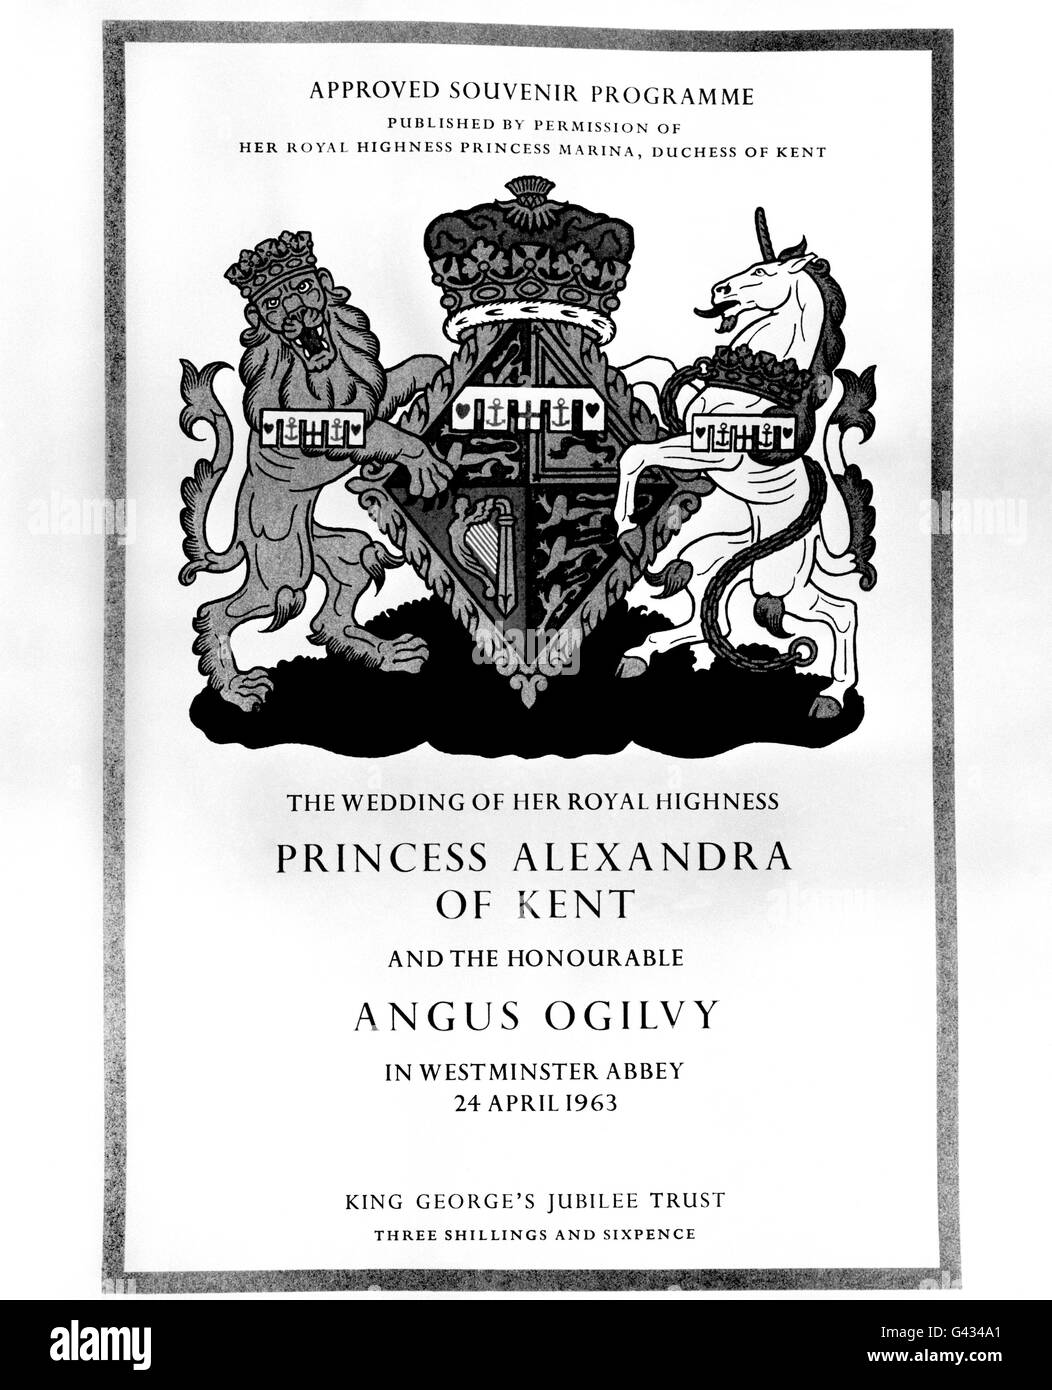 The new coat of arms of Princess Alexandra on the front cover of the souvenir programme for the wedding of Her Royal Highness and the Hon. Angus Ogilvy. Stock Photo